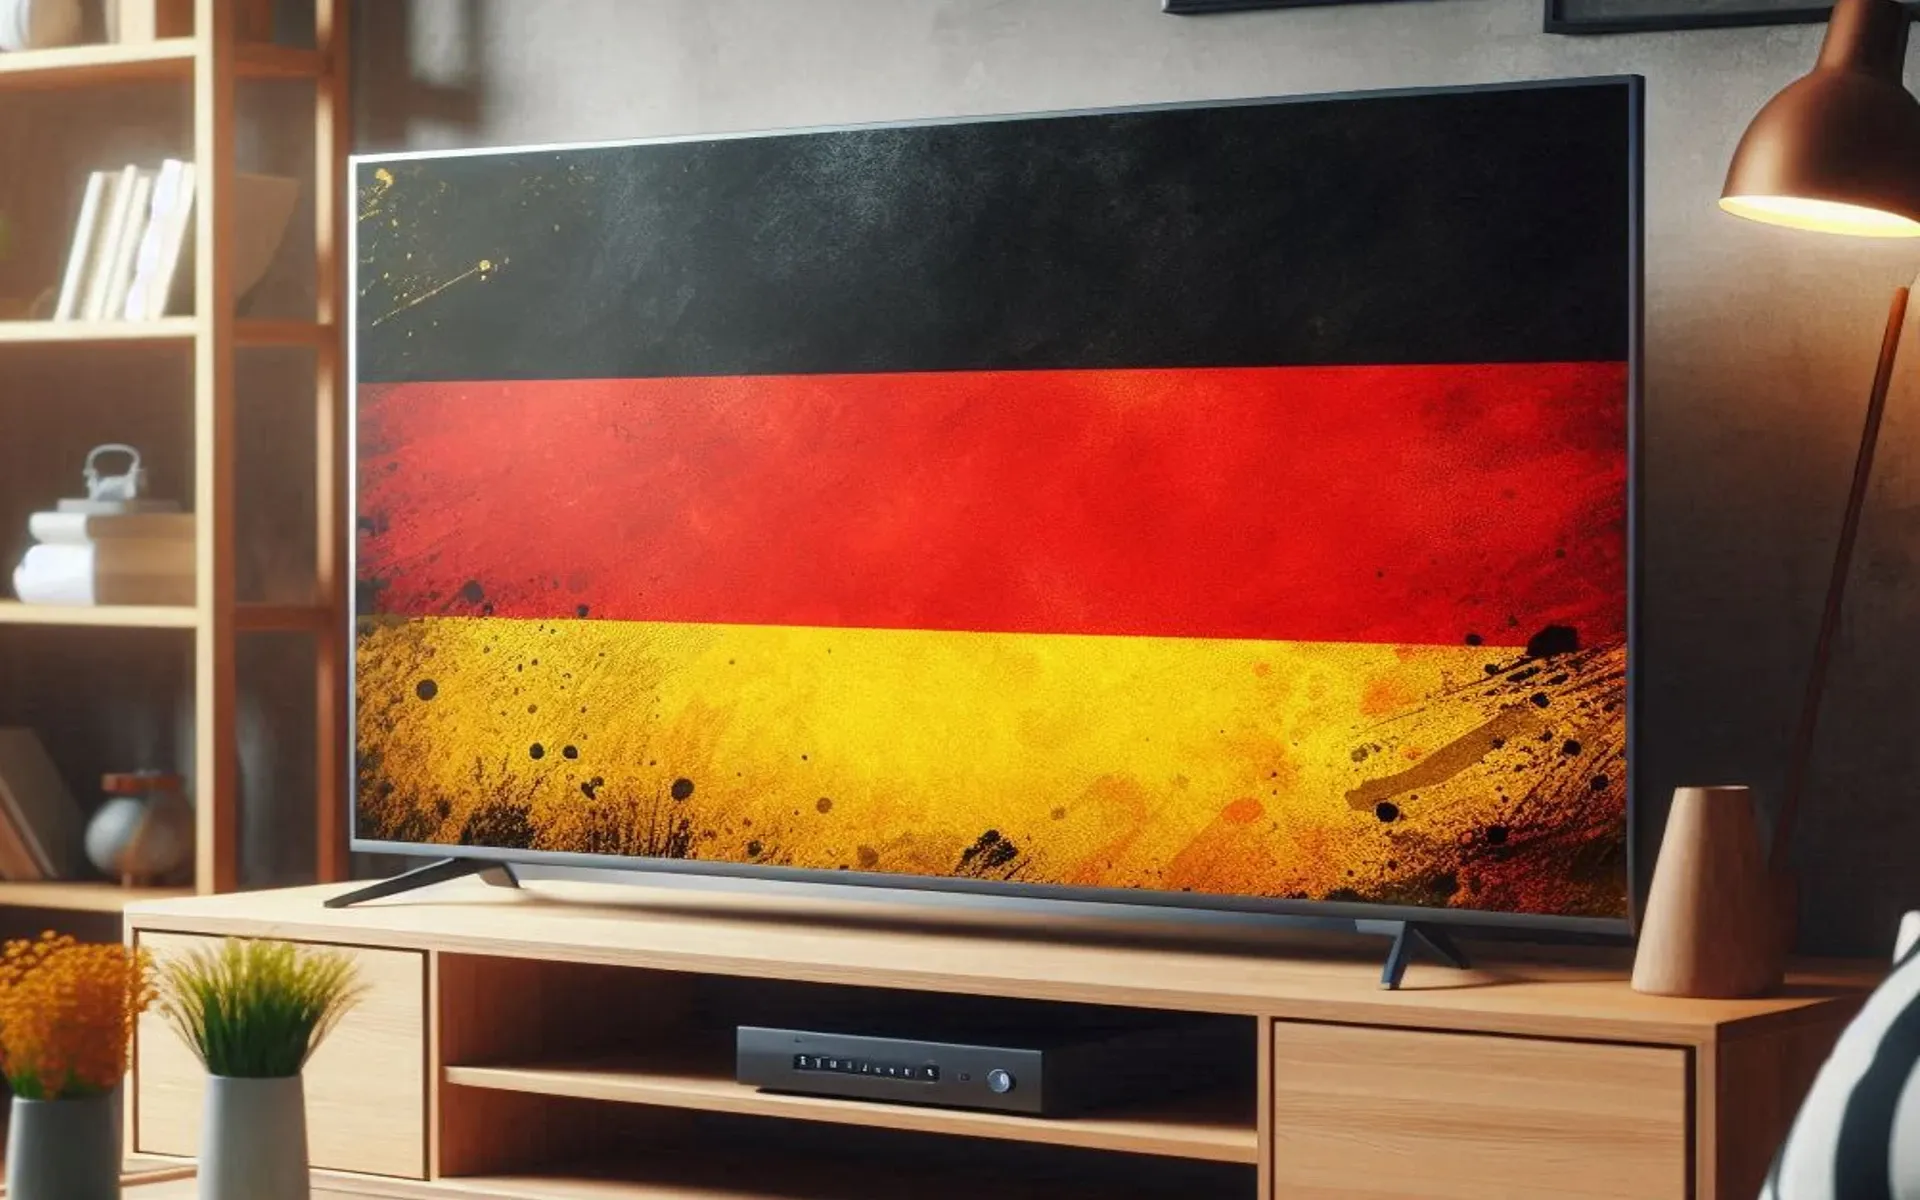 Traditional TV loses ground to Streaming in Germany